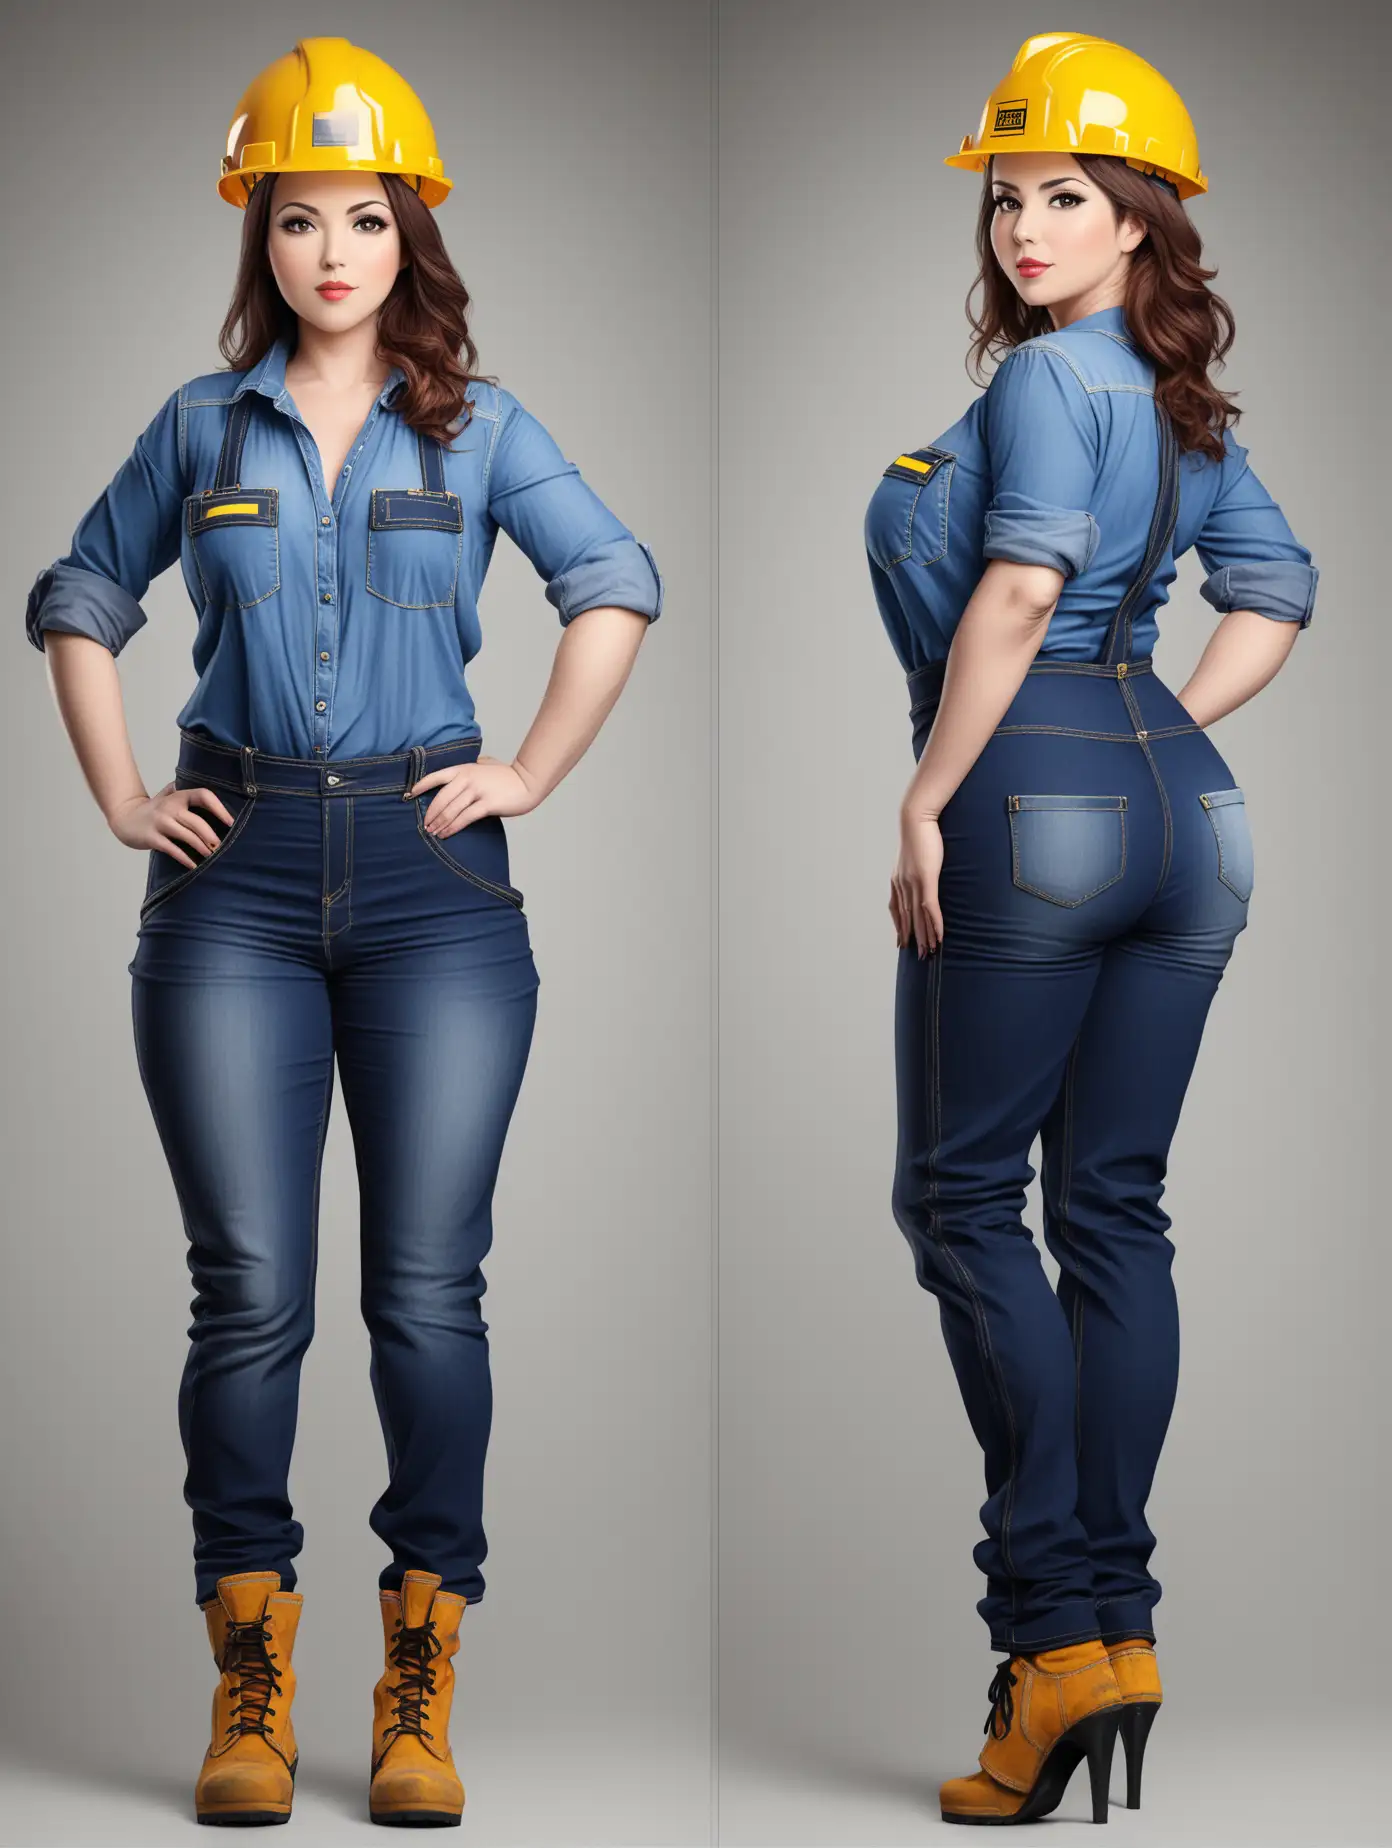 Sensual picture of a hot girl, age 30, builder outfit, big ass, 2 poses, full body